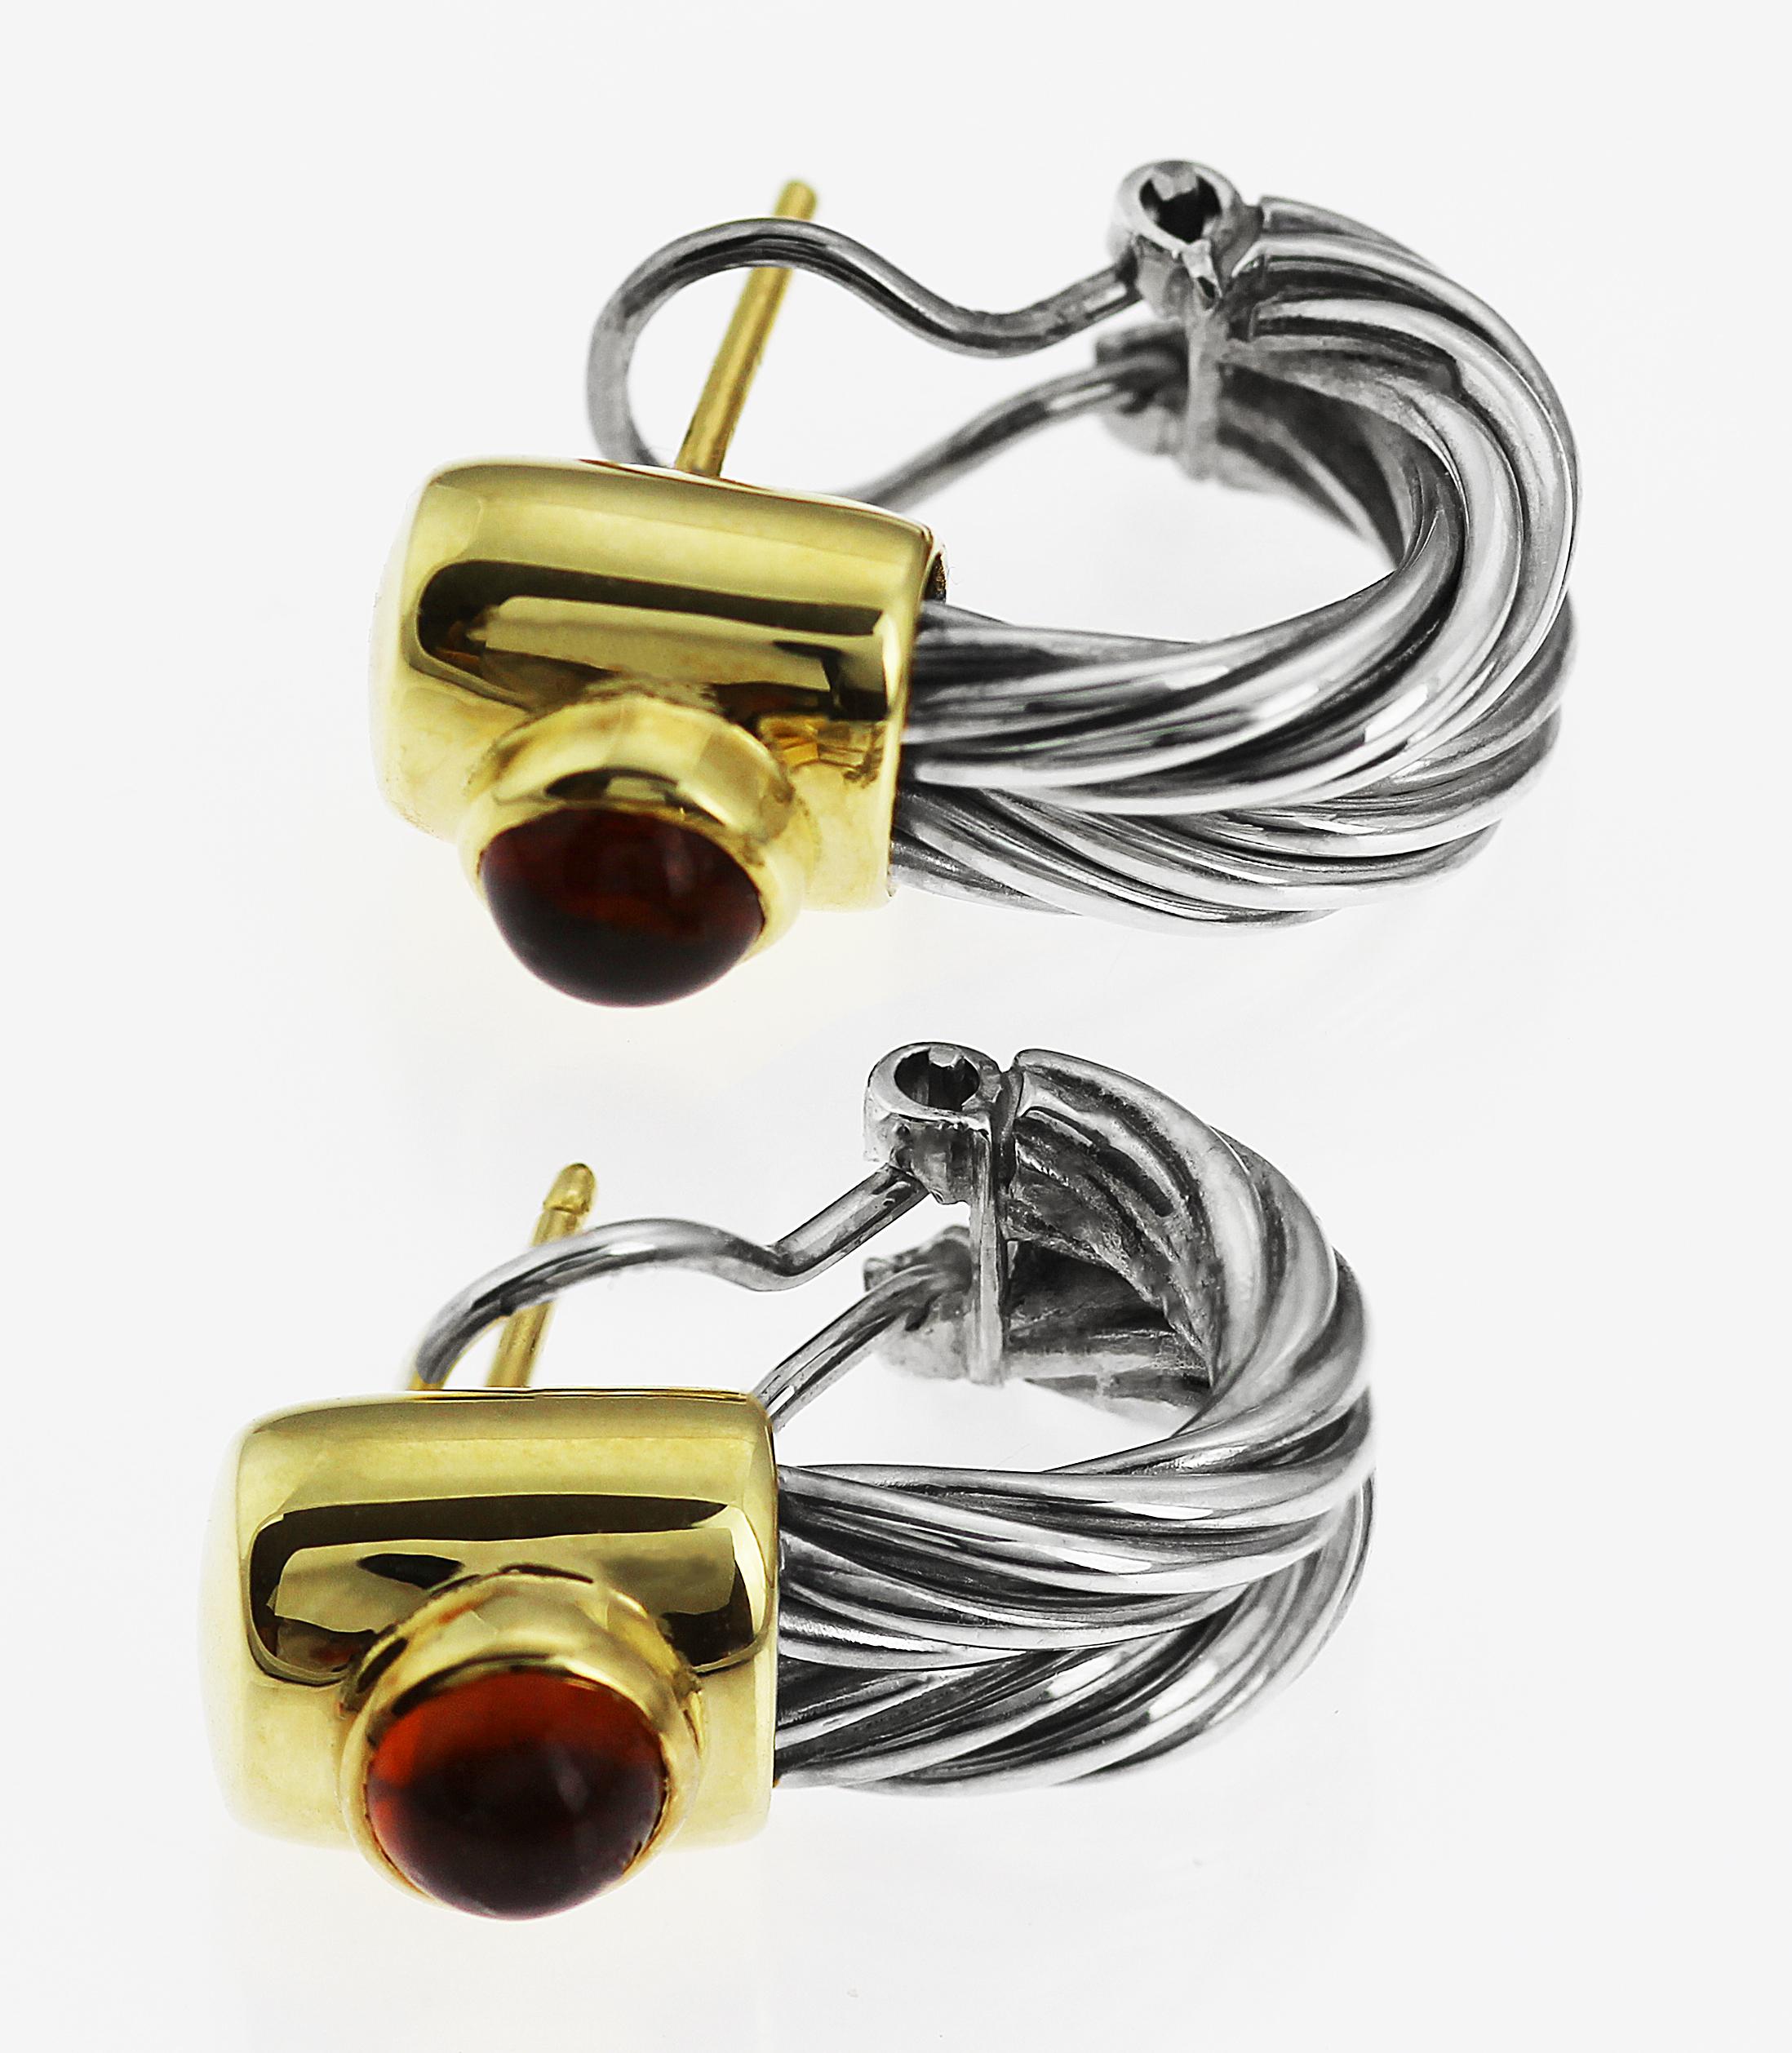 A beautiful design by Tiffany in silver and 18 ct yellow gold pair of earrings. A twisted wire cable-style with cabochon rare red amber on top, in 18 ct yellow gold with easy to wear pin and wire fittings. 
Retired earrings with British hallmarked